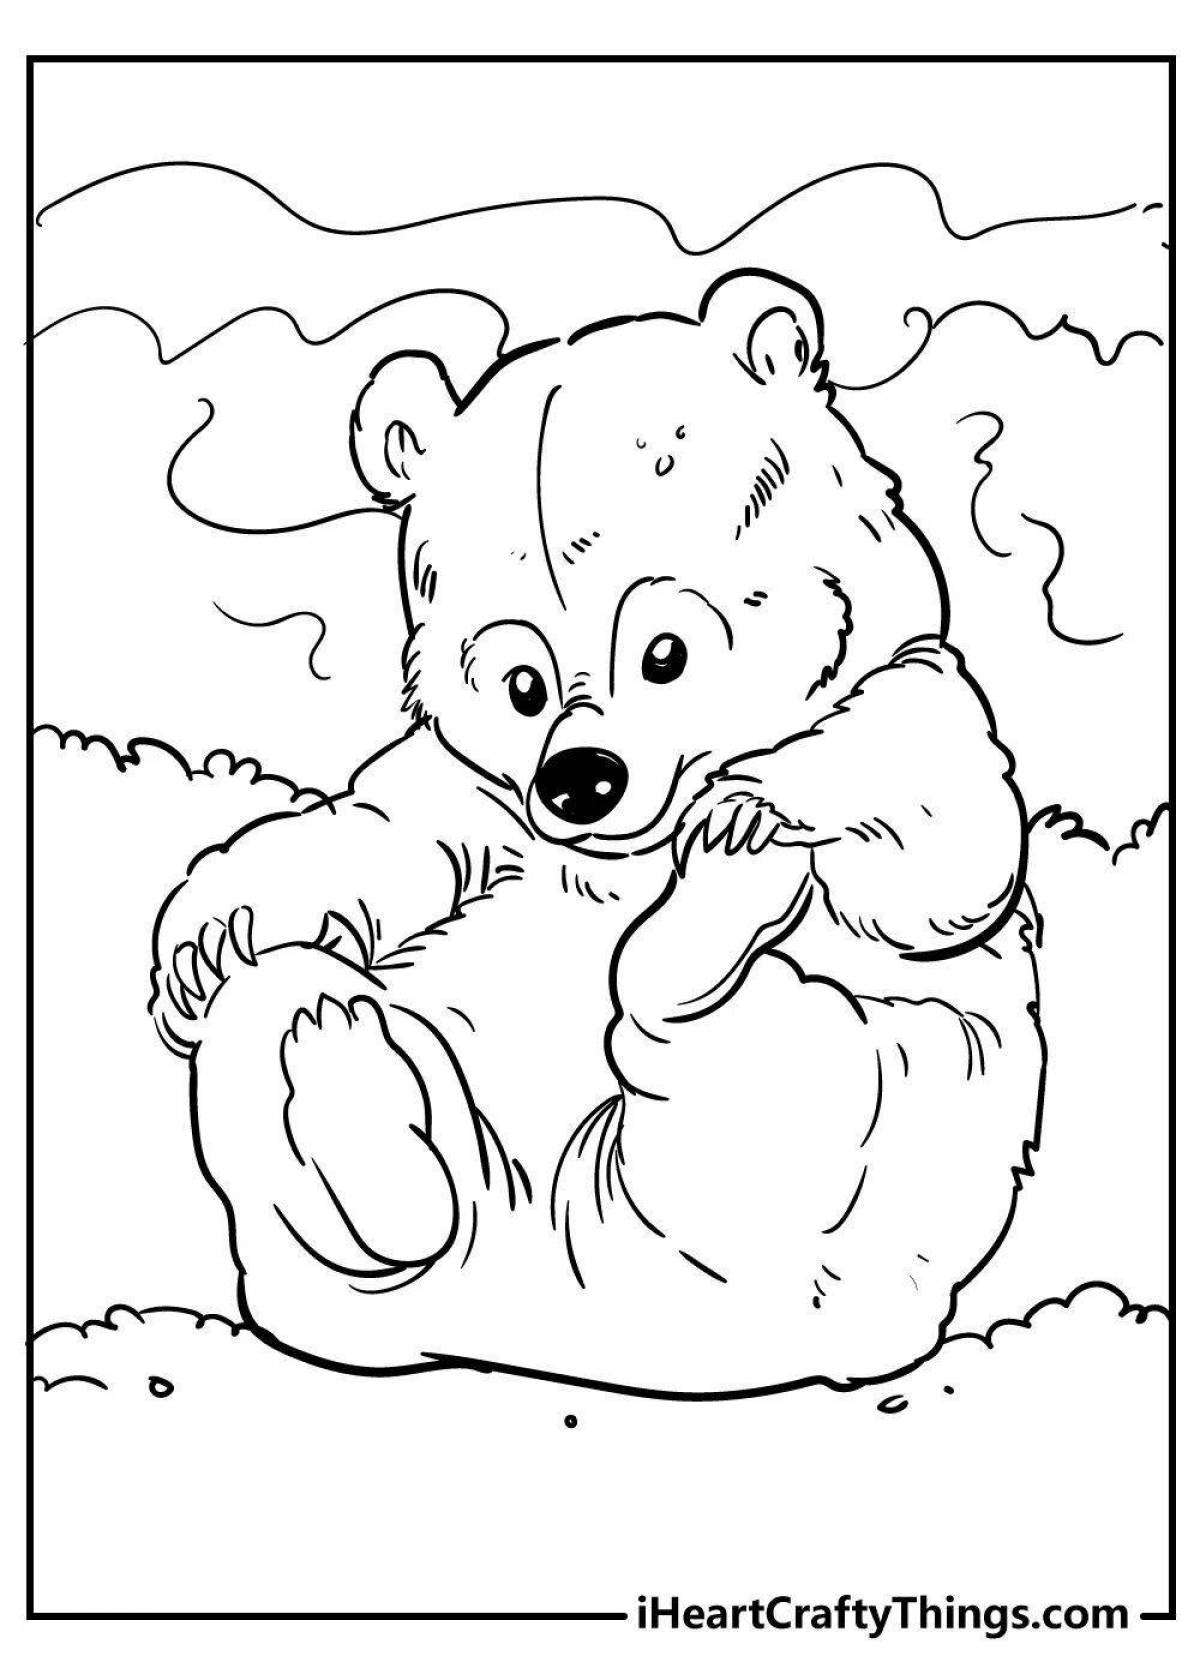 Colorful teddy bear coloring book for 5-6 year olds